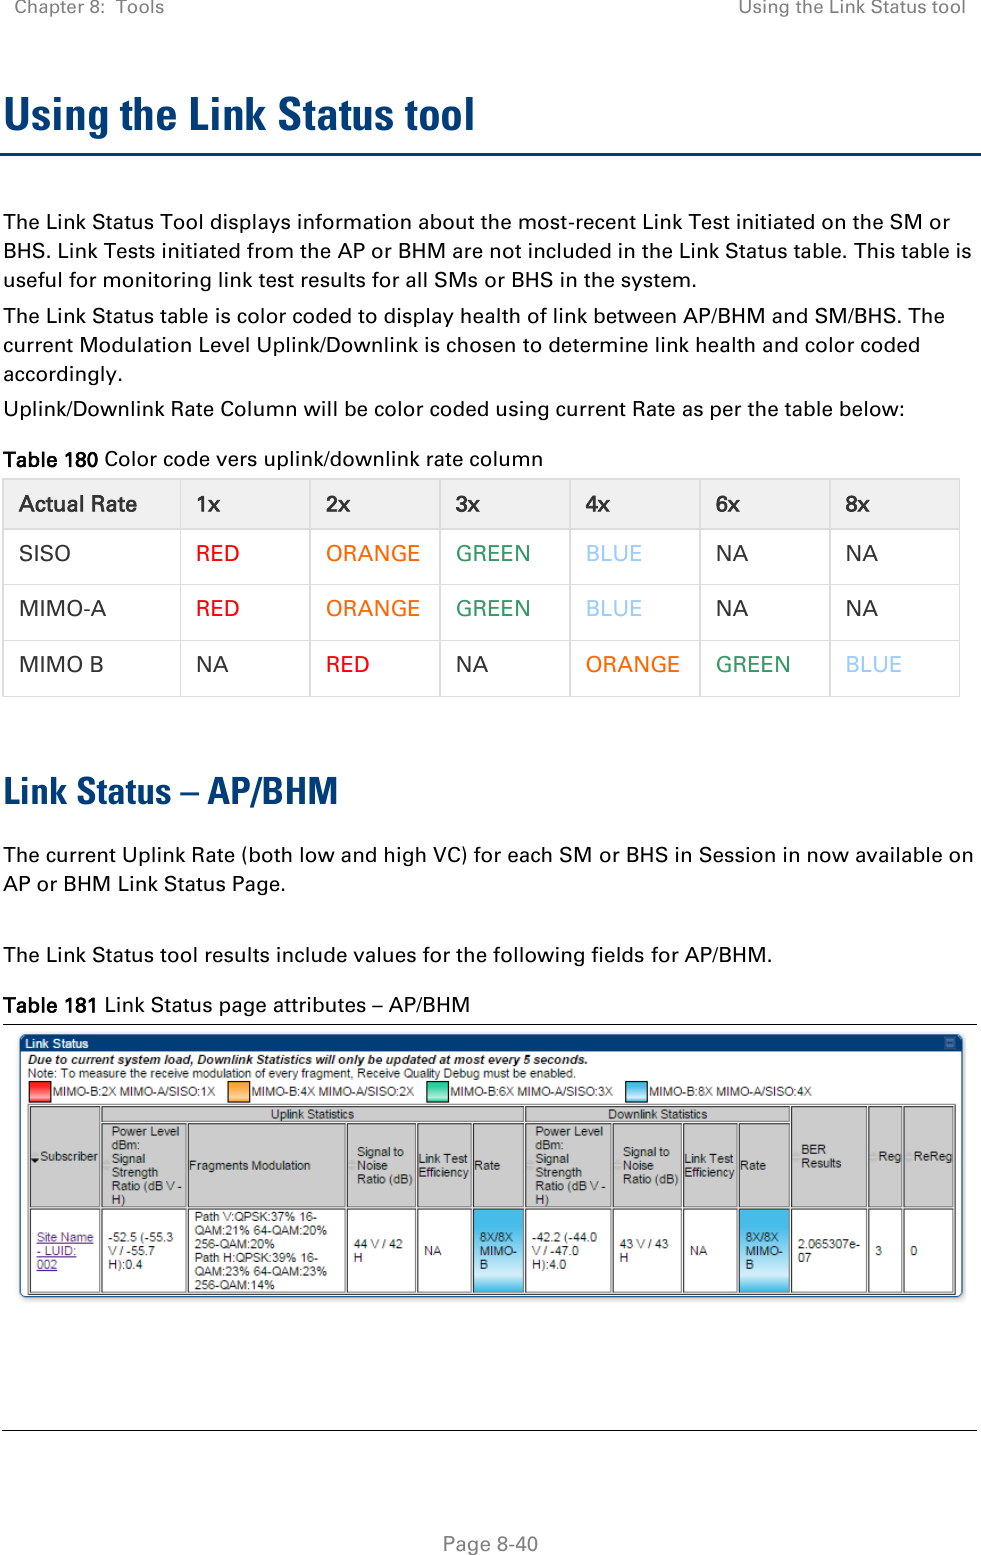 Chapter 8:  Tools Using the Link Status tool   Page 8-40 Using the Link Status tool The Link Status Tool displays information about the most-recent Link Test initiated on the SM or BHS. Link Tests initiated from the AP or BHM are not included in the Link Status table. This table is useful for monitoring link test results for all SMs or BHS in the system. The Link Status table is color coded to display health of link between AP/BHM and SM/BHS. The current Modulation Level Uplink/Downlink is chosen to determine link health and color coded accordingly. Uplink/Downlink Rate Column will be color coded using current Rate as per the table below: Table 180 Color code vers uplink/downlink rate column Actual Rate 1x 2x   3x 4x 6x 8x SISO RED ORANGE GREEN BLUE NA NA MIMO-A RED ORANGE GREEN BLUE NA NA MIMO B NA RED NA ORANGE GREEN BLUE  Link Status – AP/BHM The current Uplink Rate (both low and high VC) for each SM or BHS in Session in now available on AP or BHM Link Status Page.  The Link Status tool results include values for the following fields for AP/BHM. Table 181 Link Status page attributes – AP/BHM  